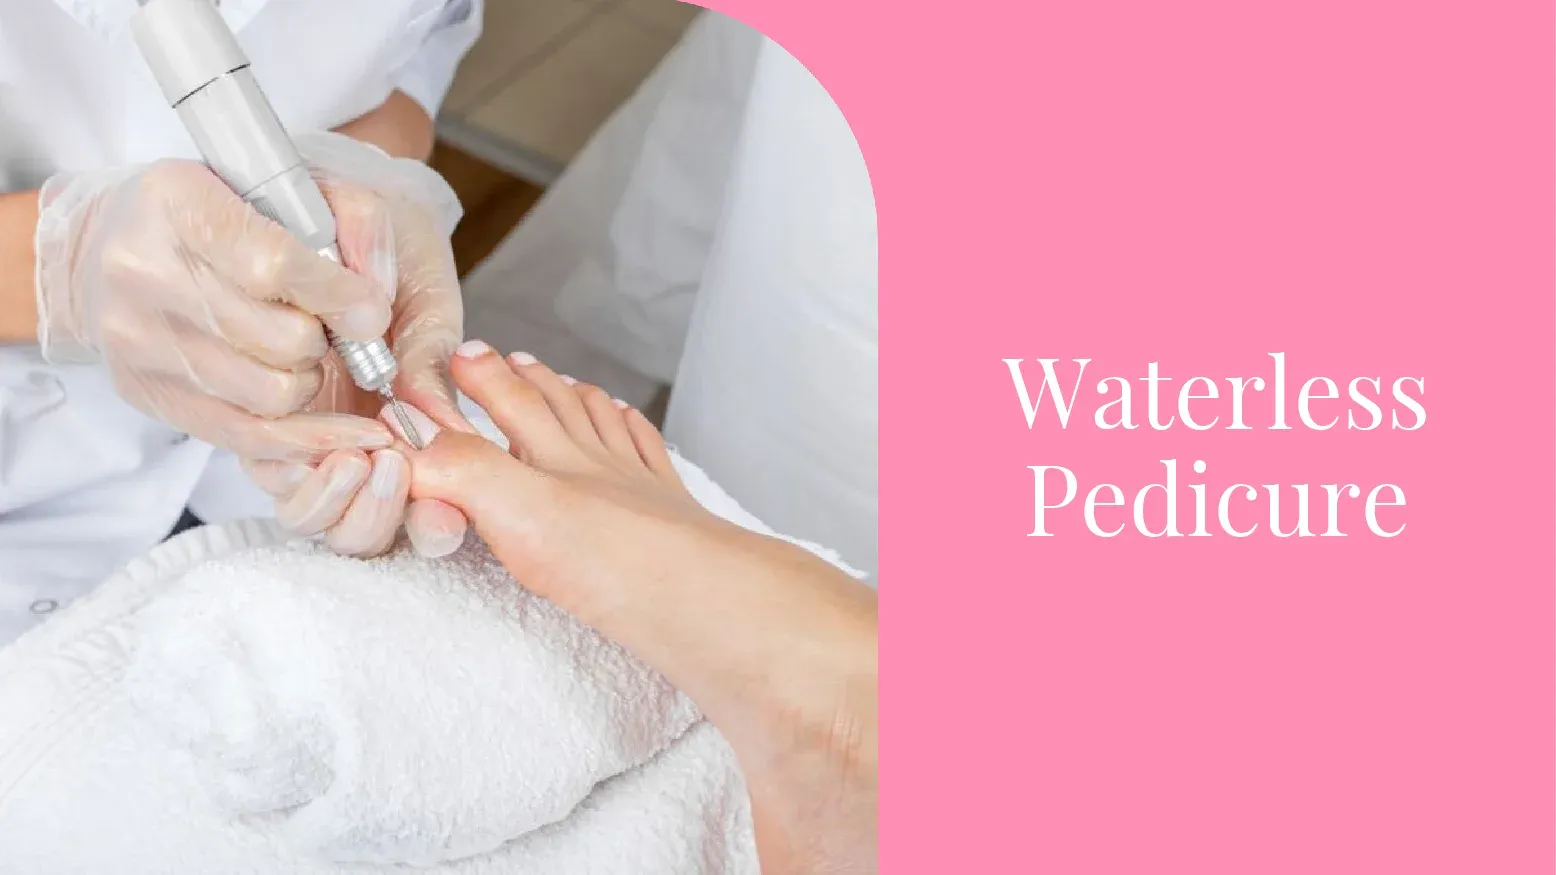 About Waterless Pedicure